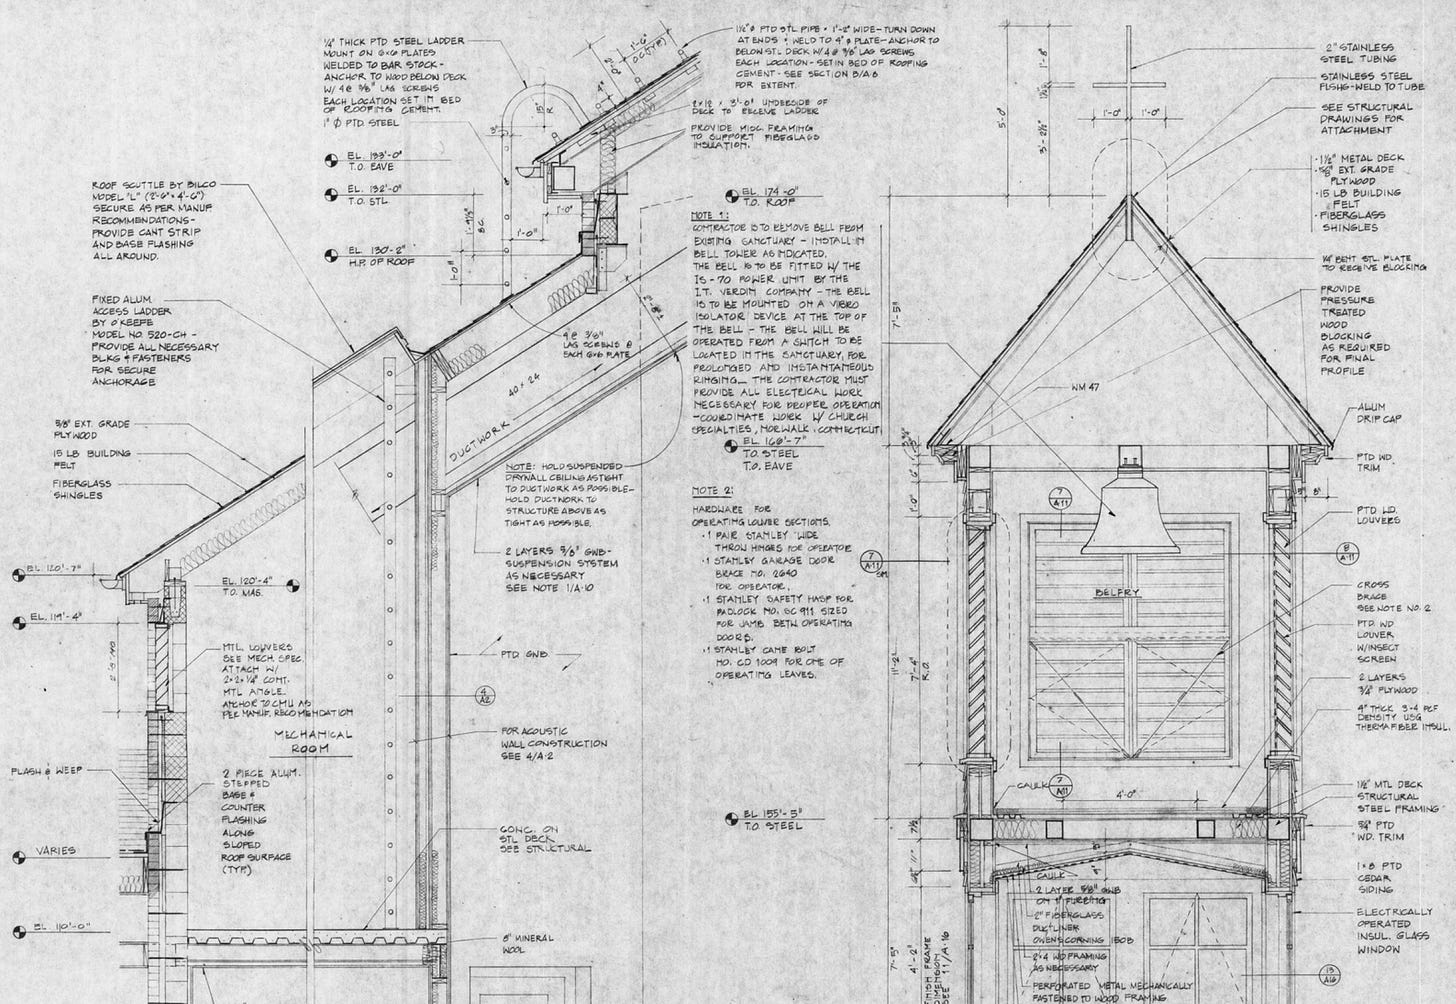 Detailed architectural drawings